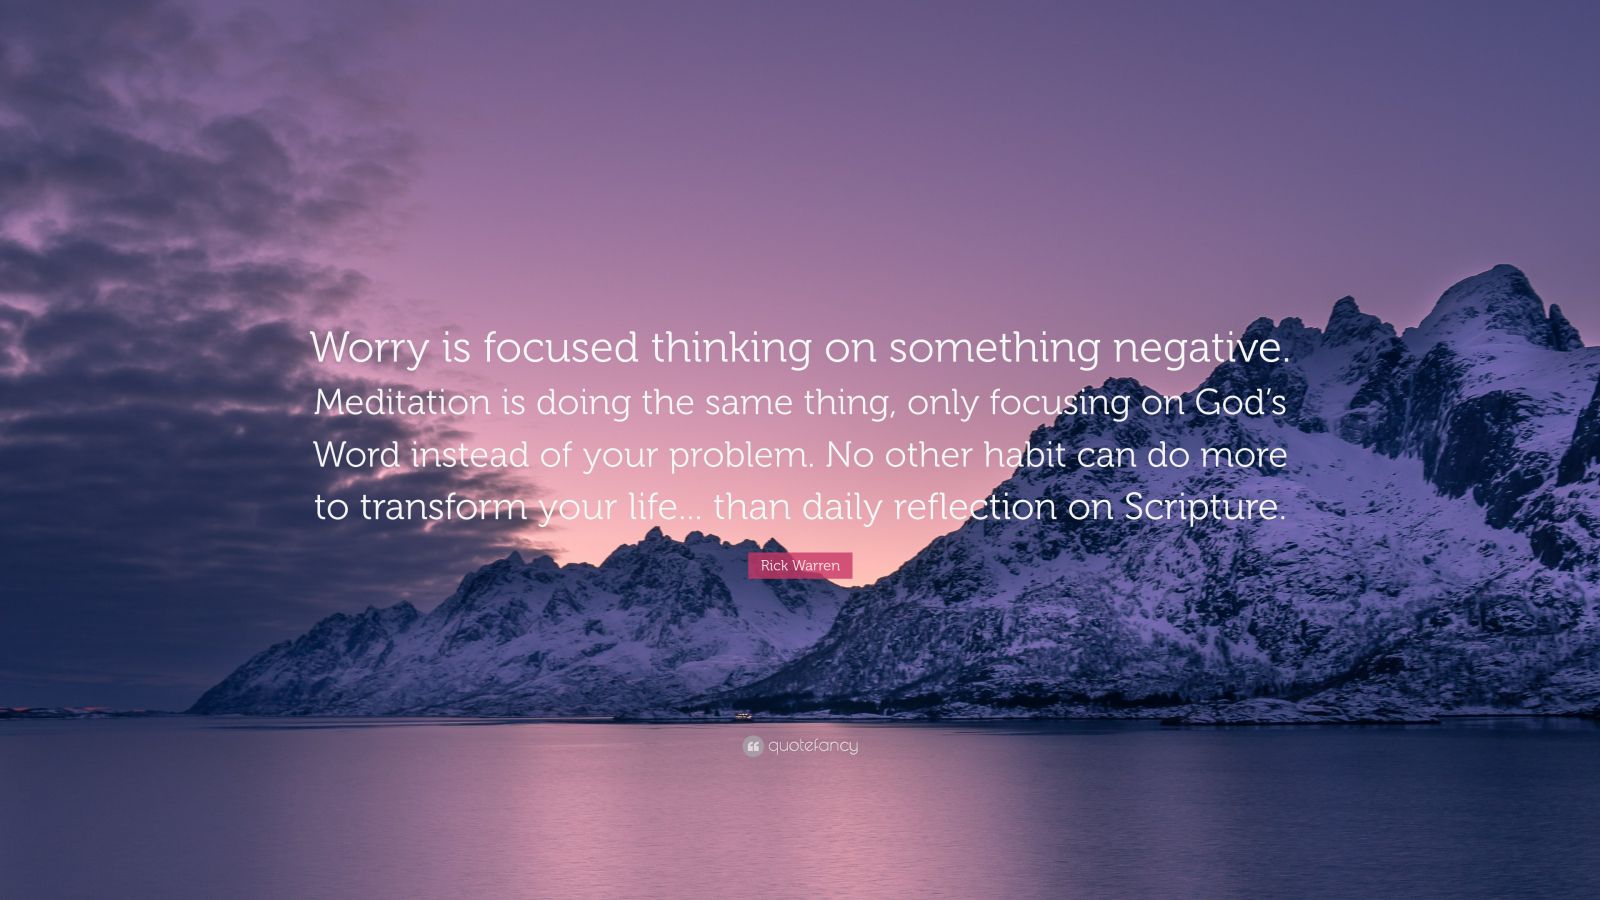 Rick Warren Quote: “Worry is focused thinking on something negative ...